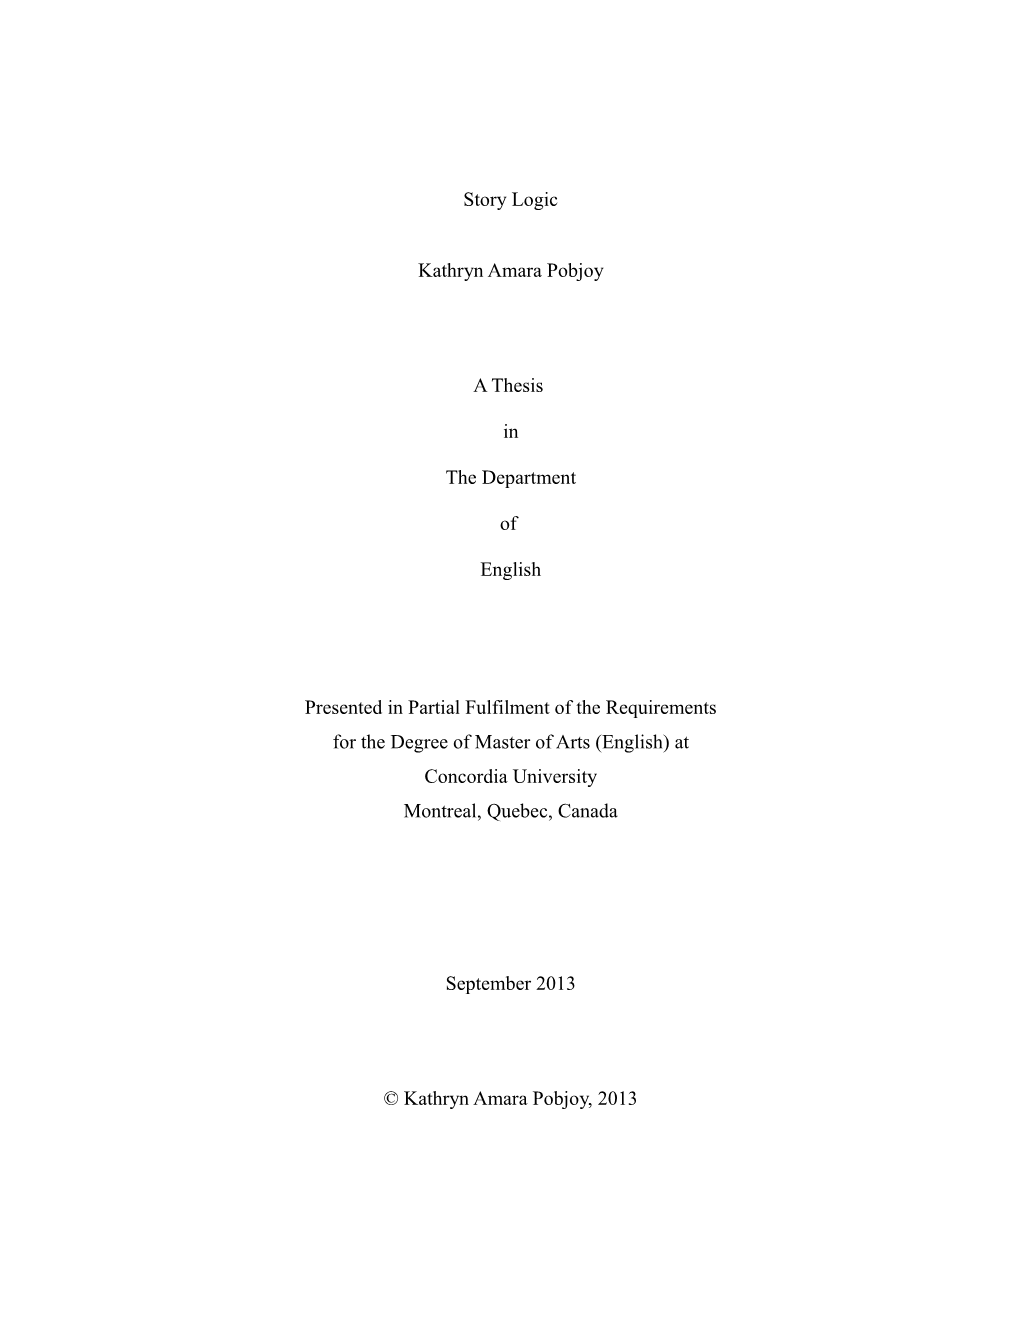 Story Logic Kathryn Amara Pobjoy a Thesis in the Department Of